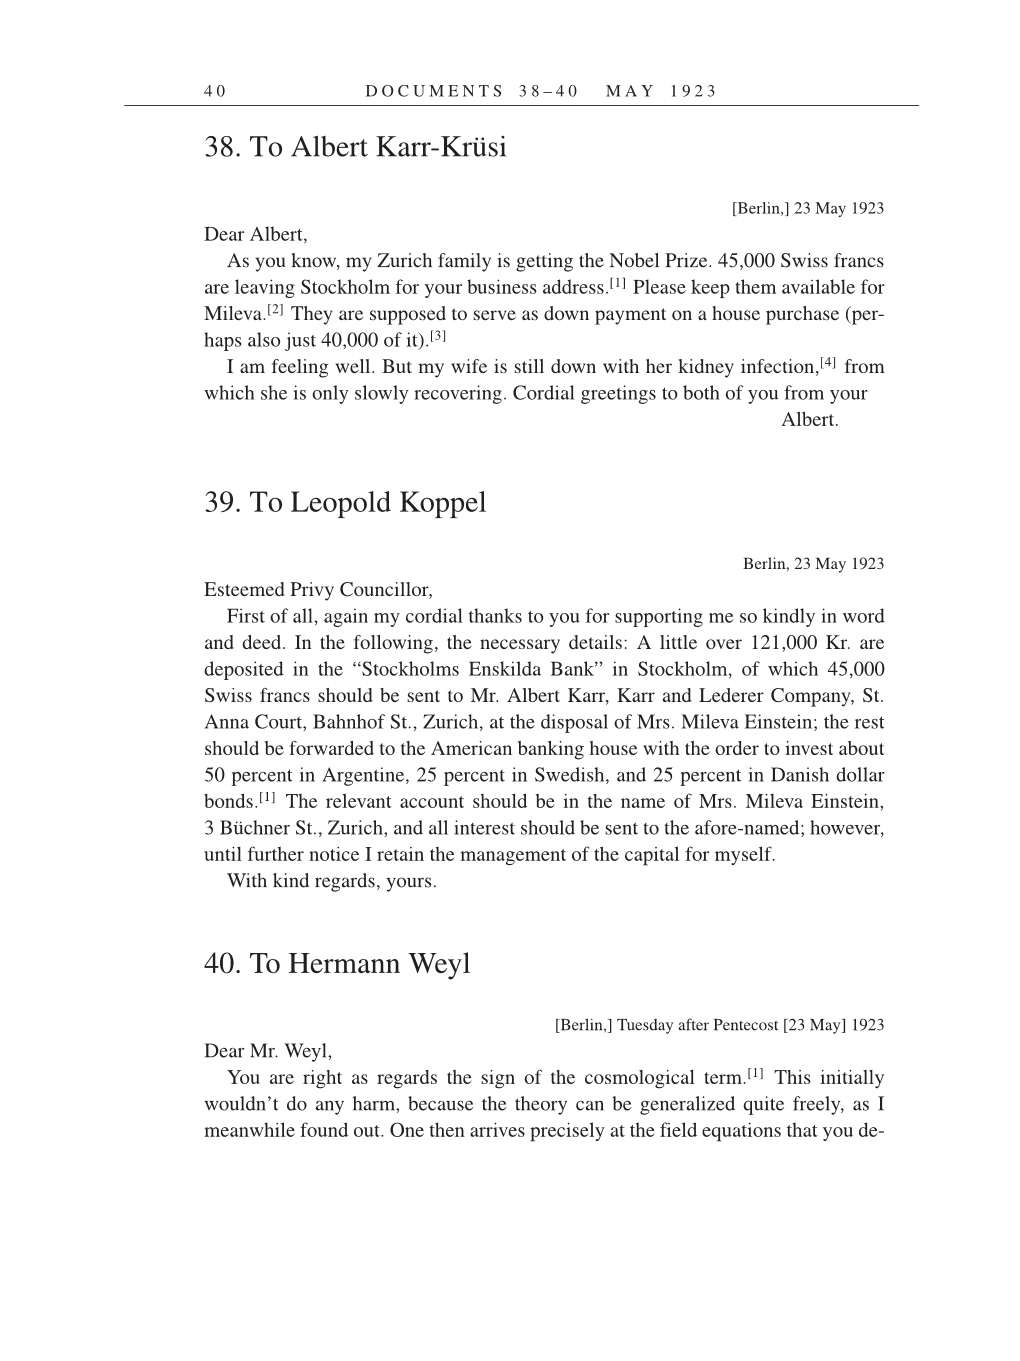 Volume 14: The Berlin Years: Writings & Correspondence, April 1923-May 1925 (English Translation Supplement) page 40